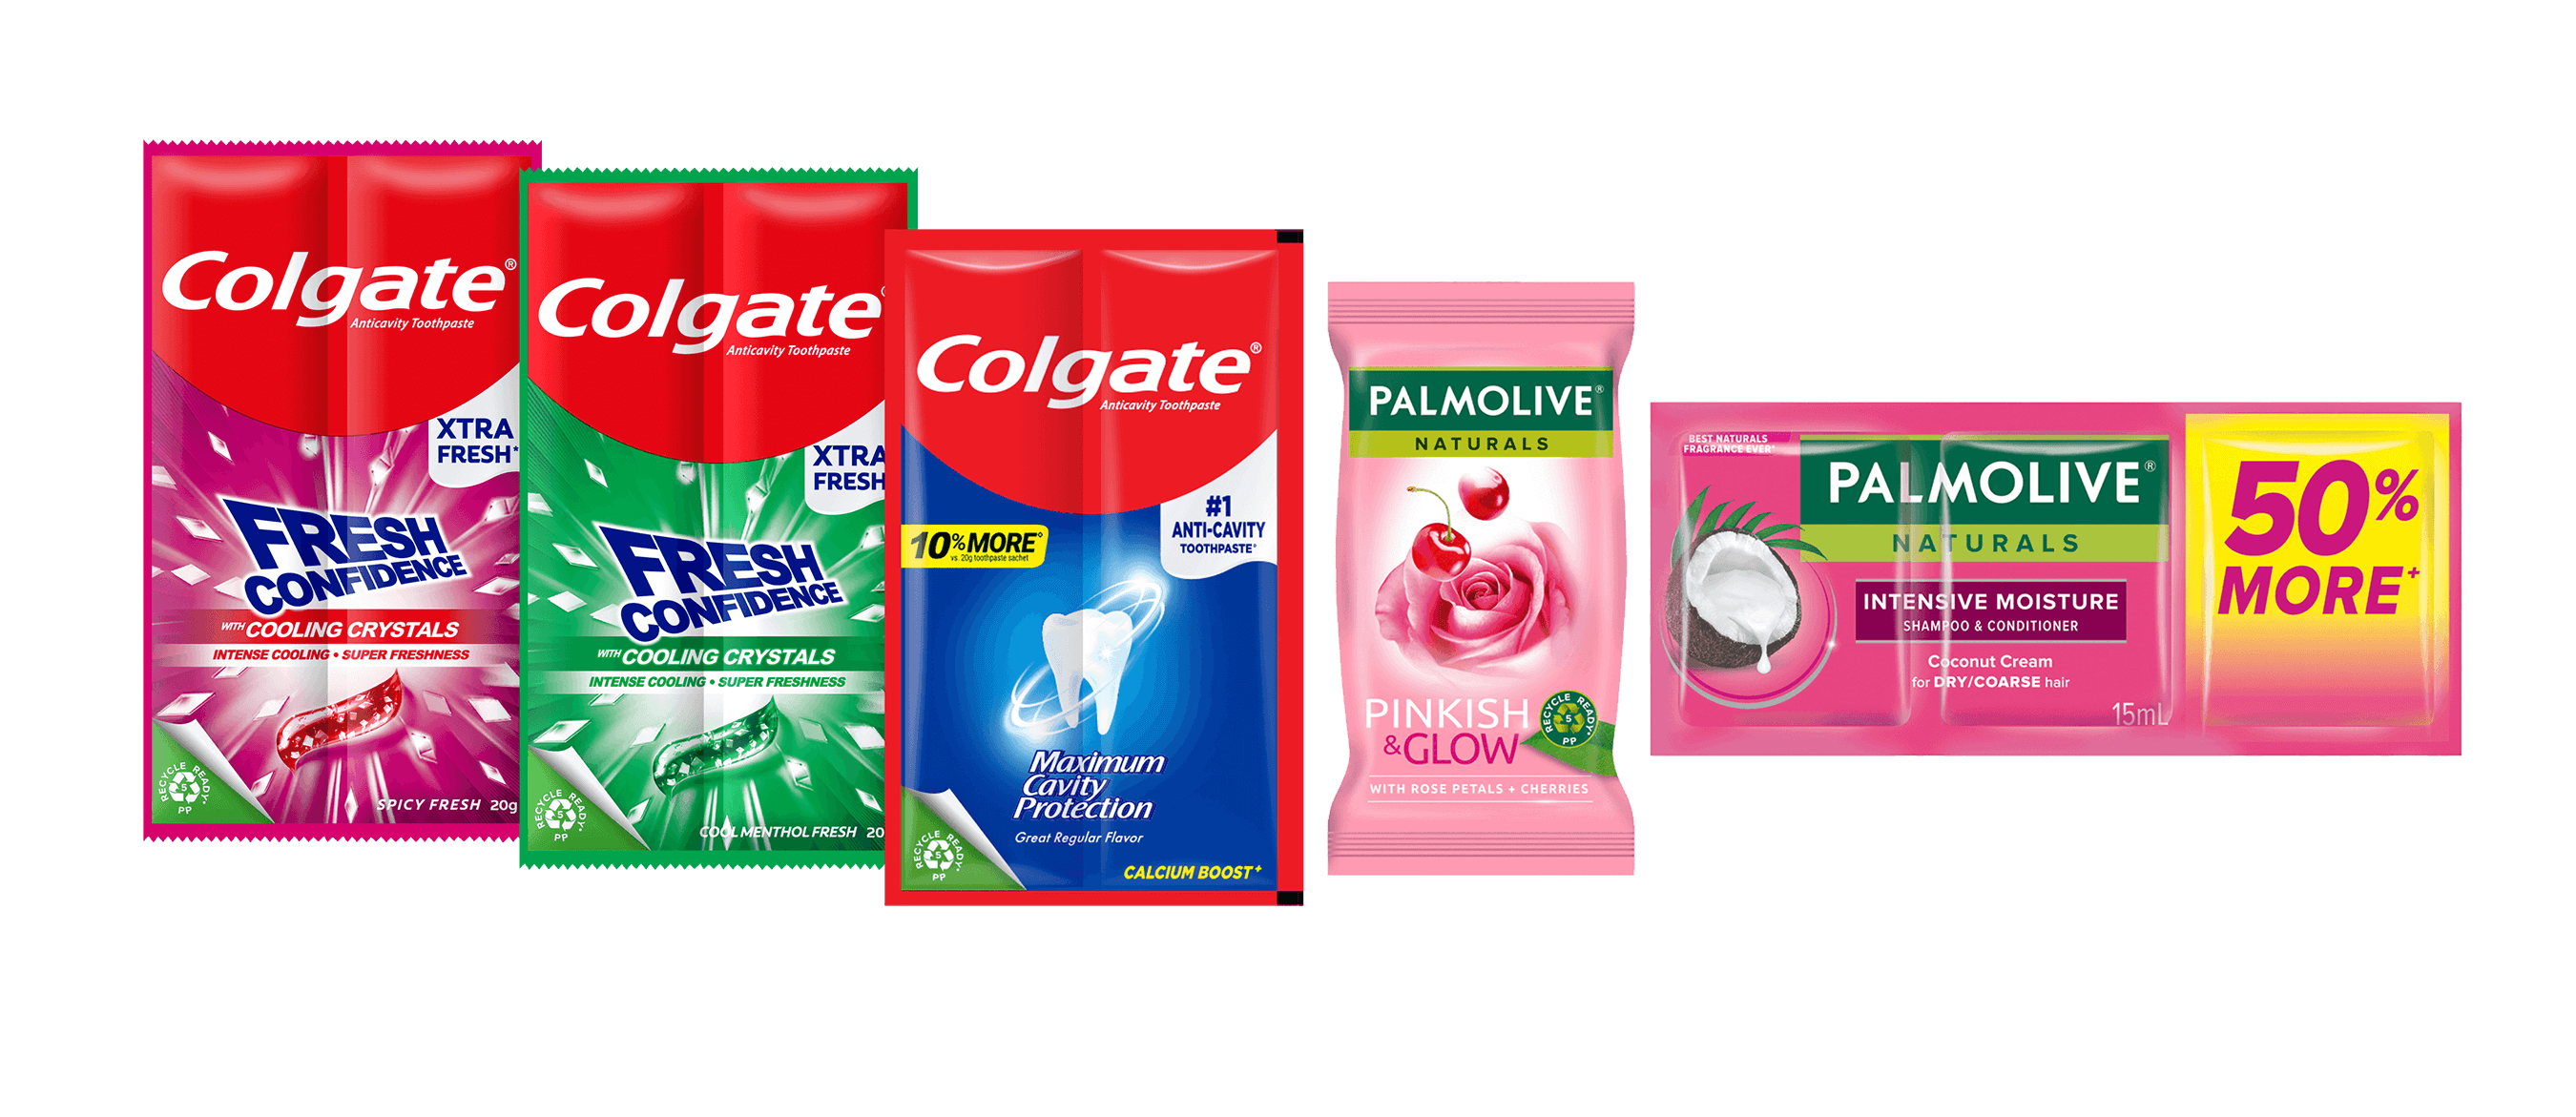 Colgate-Palmolive recycle-ready packaging